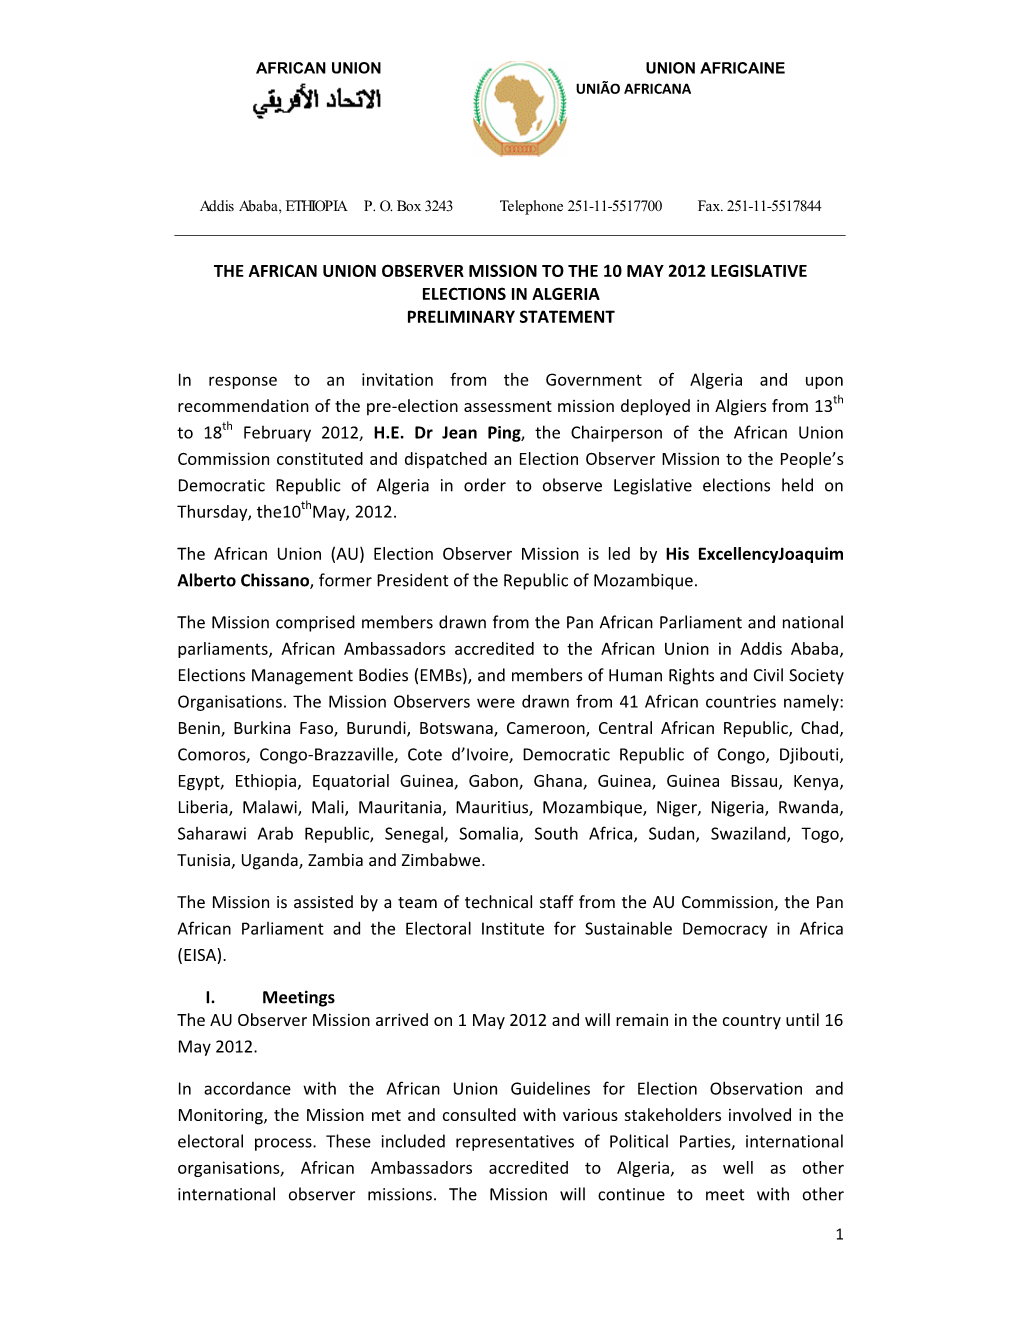 The African Union Observer Mission to the 10 May 2012 Legislative Elections in Algeria Preliminary Statement